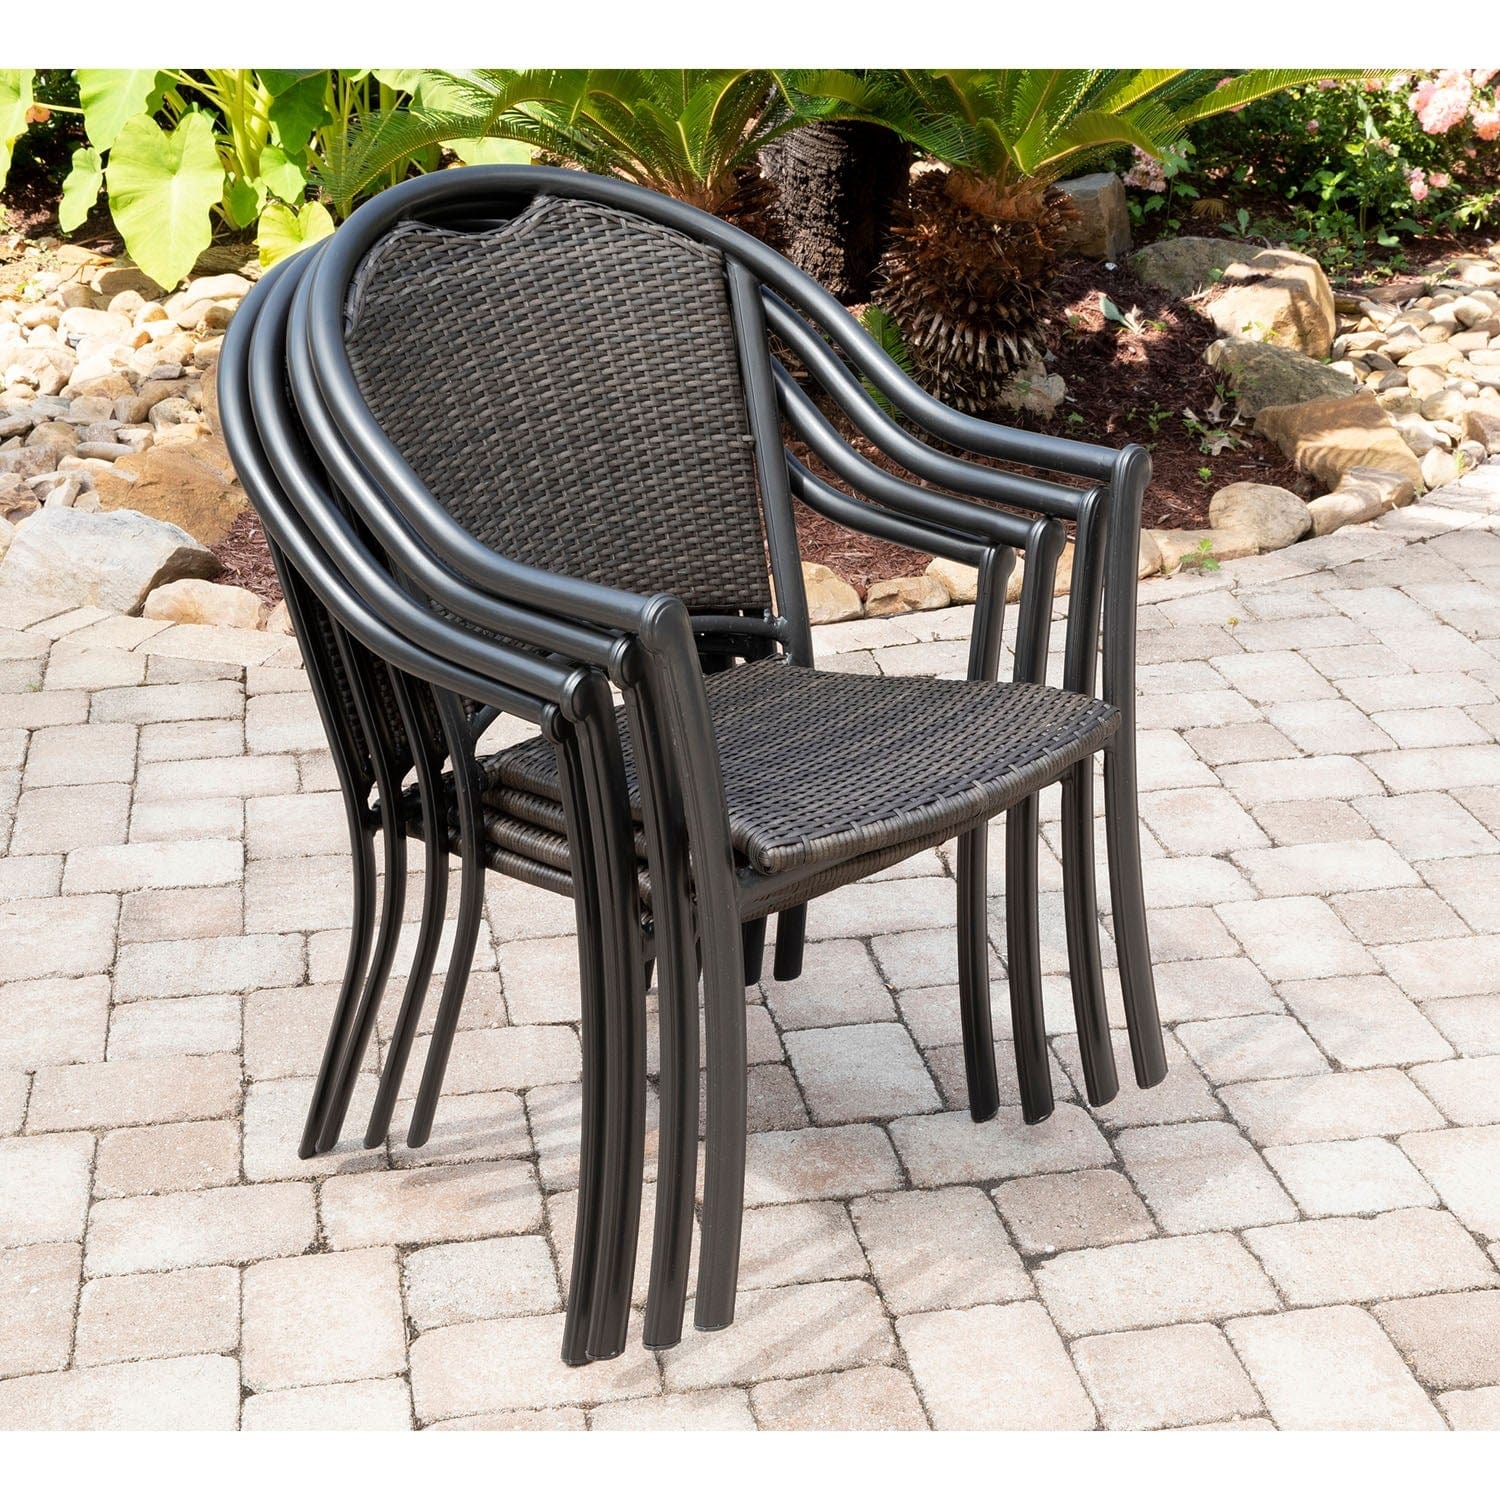 Hanover Outdoor Dining Set Hanover - Bambray 5 Piece Dining Set | 4 Woven Dining Chairs | 1 38" Sq Glass Table | Brown | BAMDN5PCG